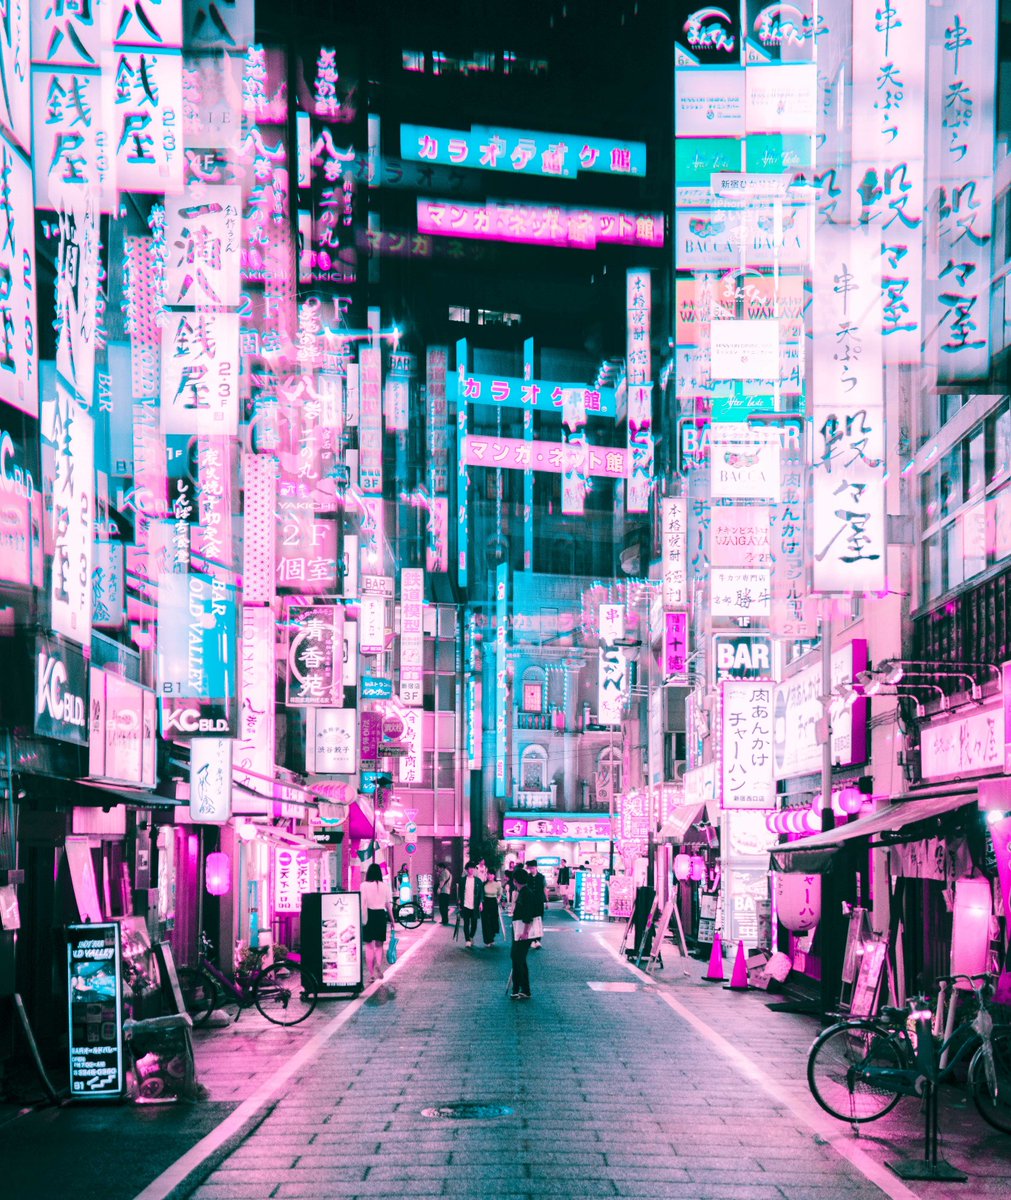 Whilst in Tokyo I've been using a fractal lens to transport today's streets to the year 2049, or perhaps even 2077.
I would love to know what you all think and would massively appreciate any RT's to help get this mini-project out there <3 Would honestly mean the world to me!